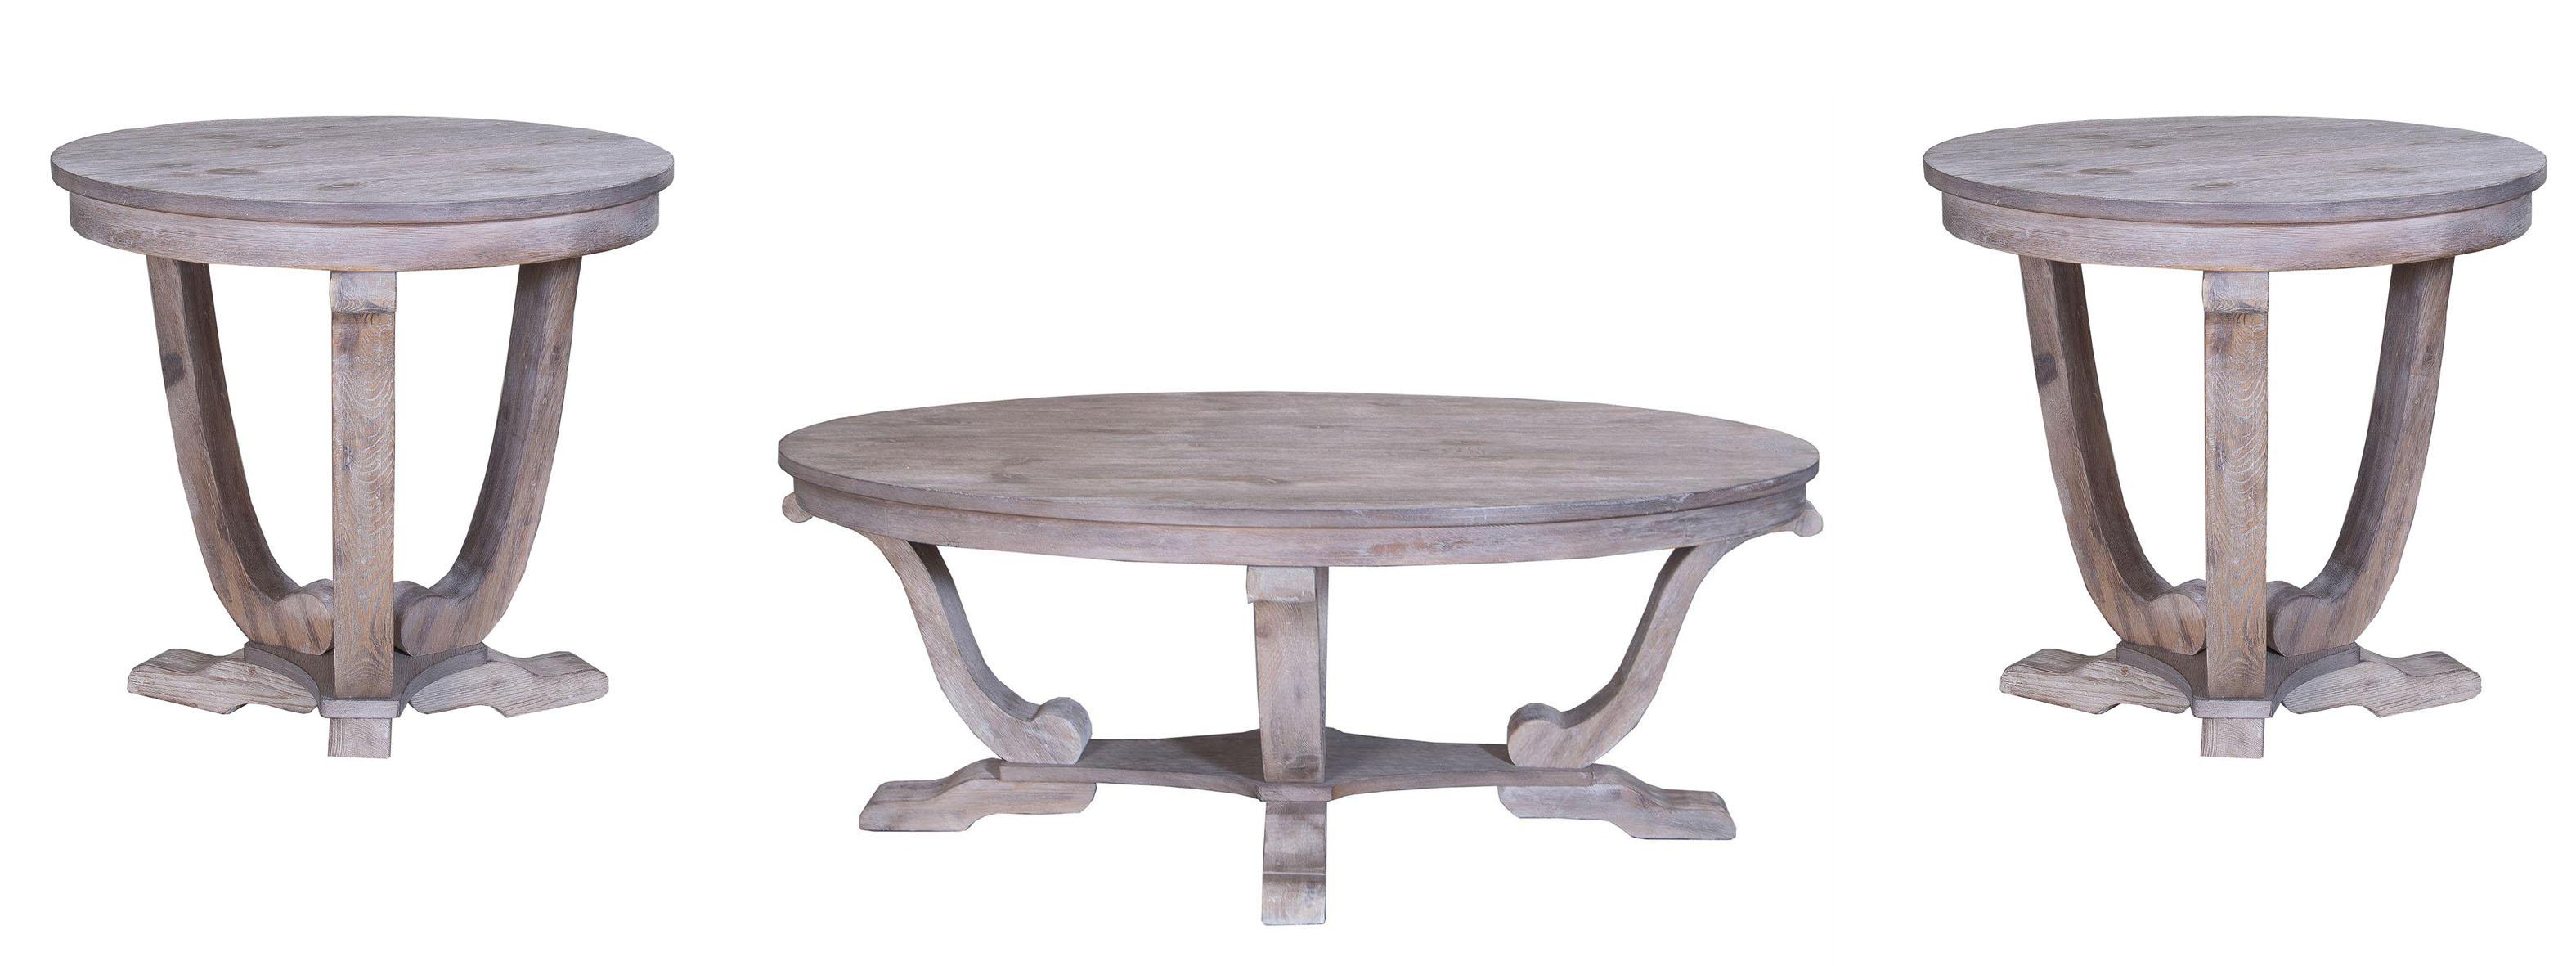 Traditional Coffee Table Set Greystone Mill  (154-OT) Coffee Table Set 154-OT-3PCS in White Brushed Technique For Rustic Feel